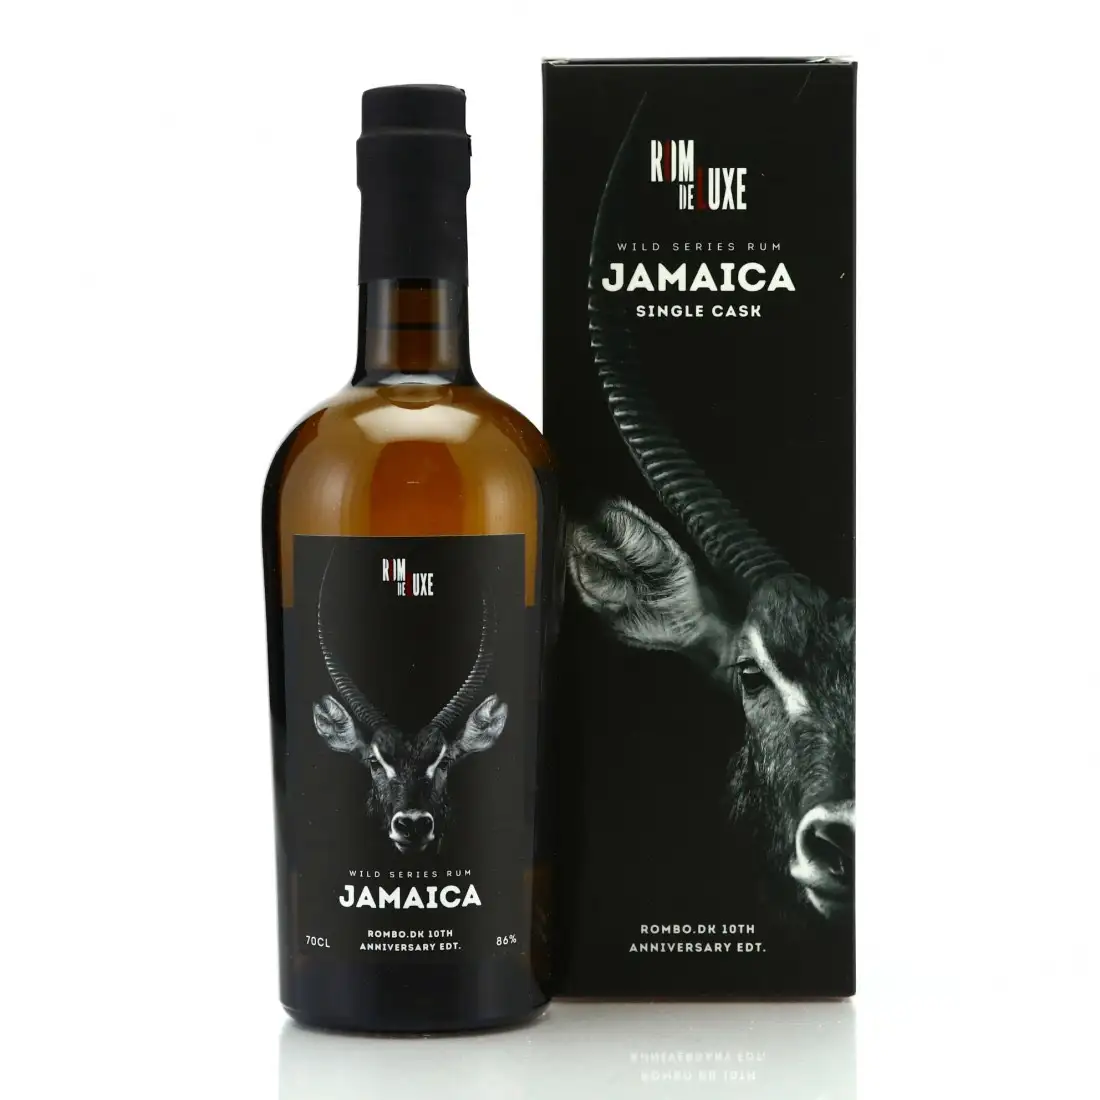 Image of the front of the bottle of the rum Wild Series Rum Jamaica No. 23 (Rombo.dk) C<>H